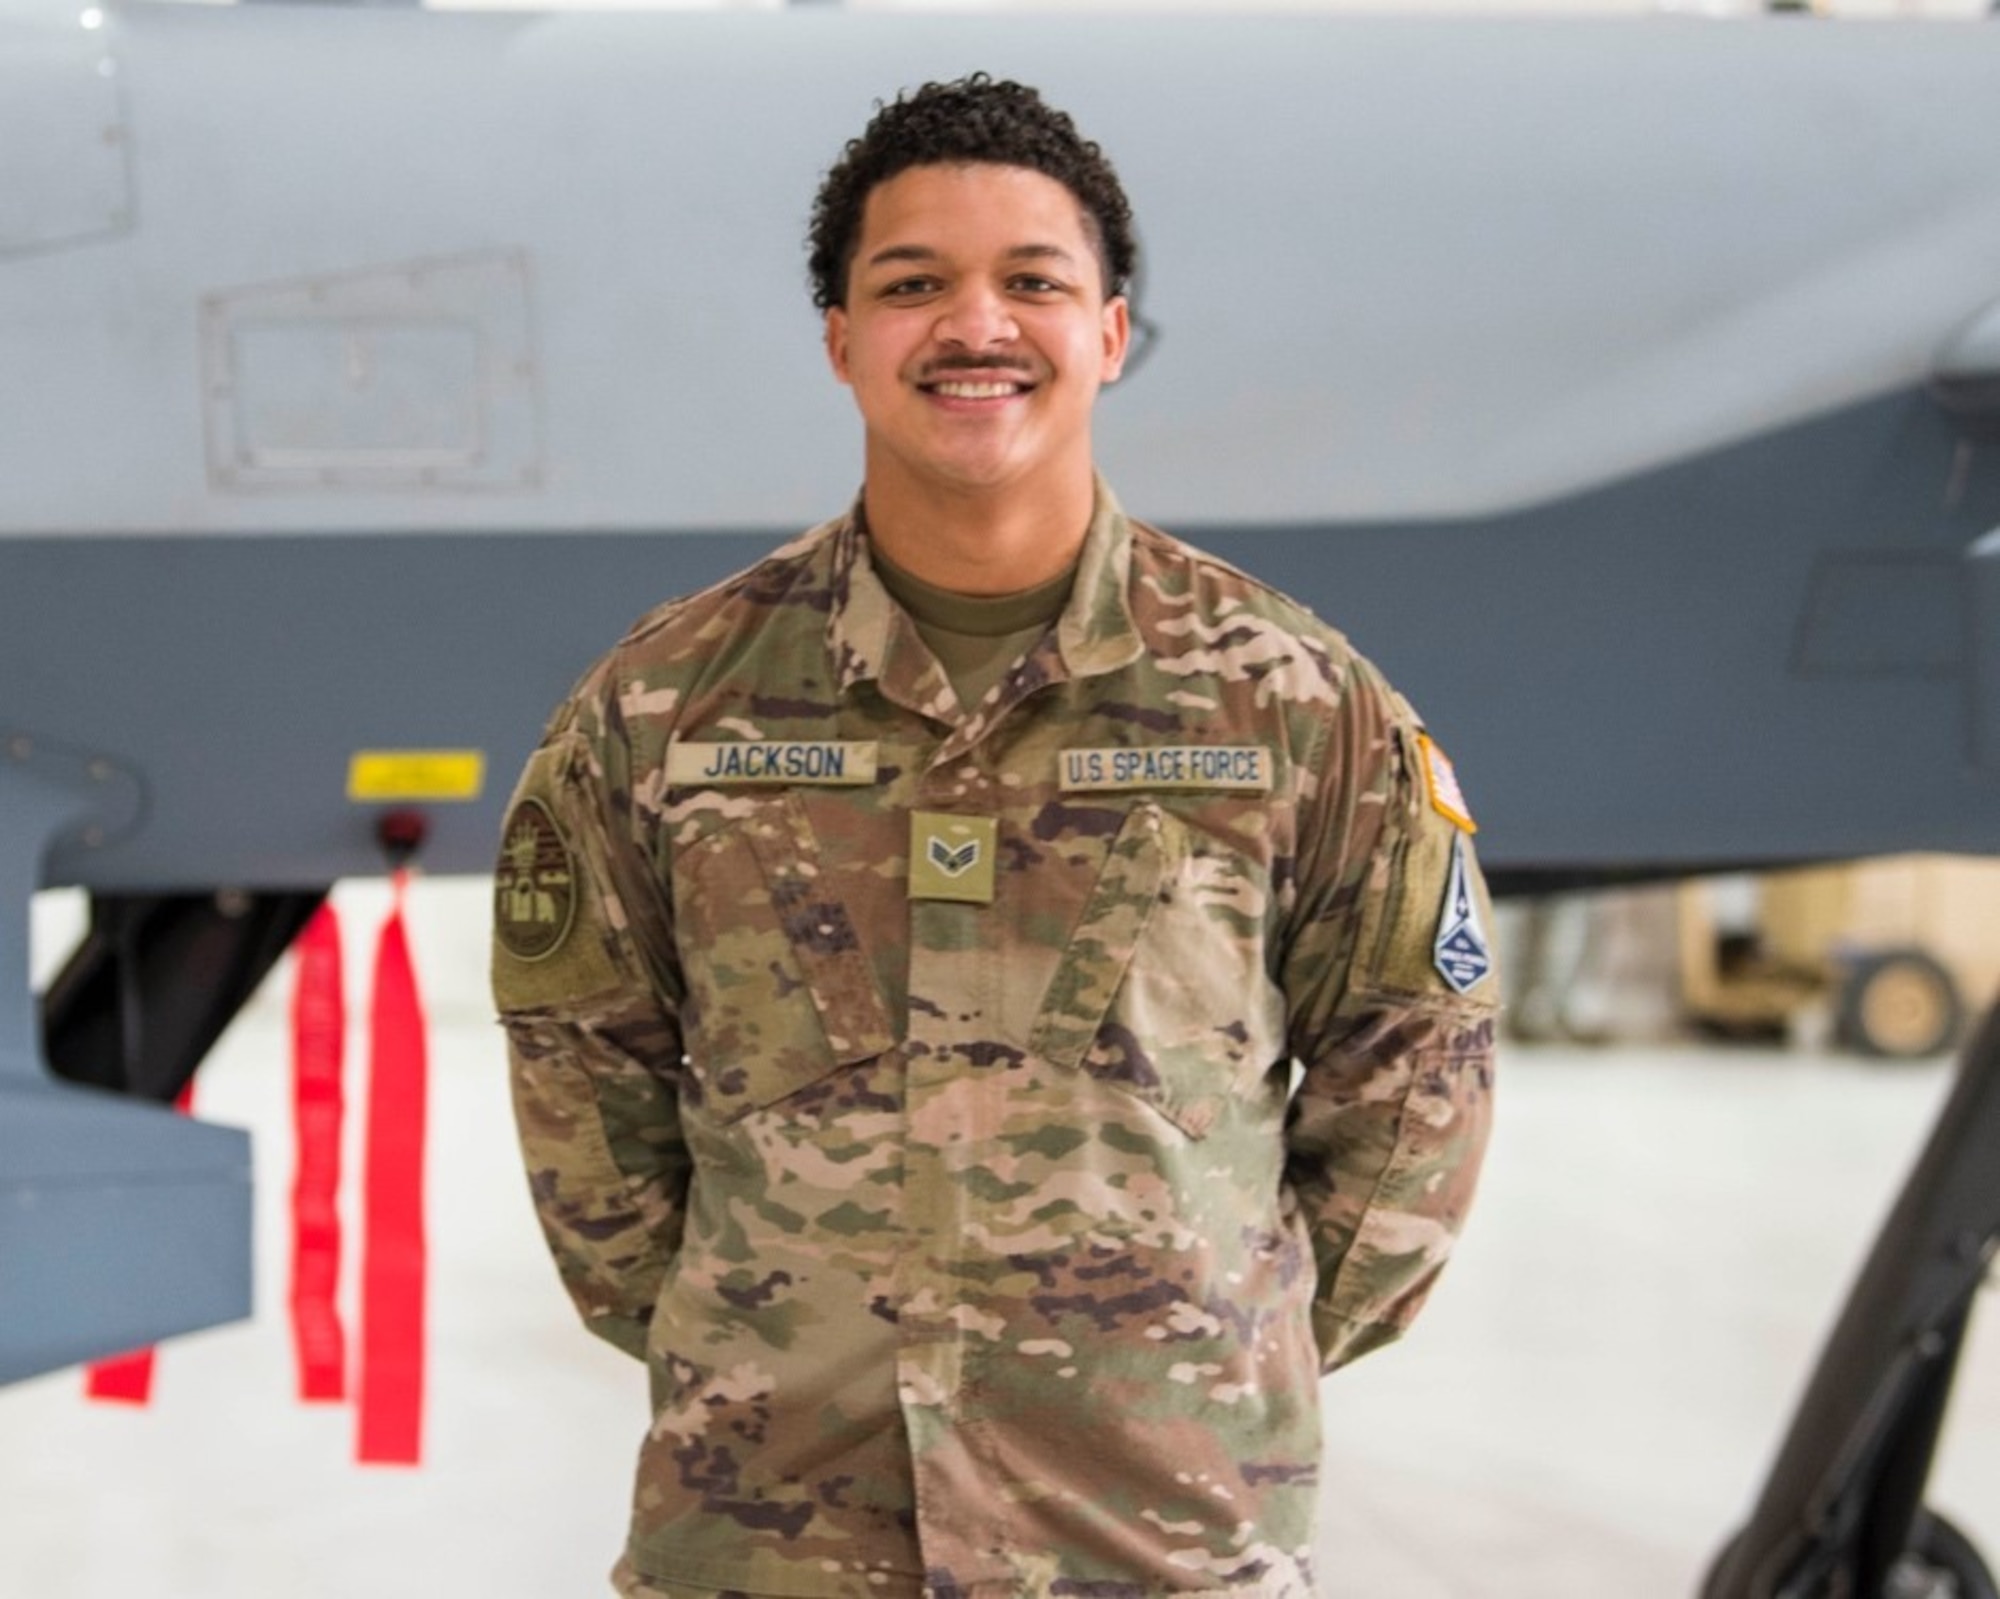 U.S. Space Force Specialist 4 Bronze Jackson, 49th Aircraft Maintenance Squadron, poses for a photo Feb. 12, 2021, on Holloman Air Force Base, New Mexico. The USSF is currently working on transferring over 6,000 Airmen from the Air Force to the Space Force by mid-2021. In Sept. 2020, the Air Force transitioned more than 2,400 active-duty Airmen in space operations and space system operations to begin establishing, maintaining, and preserving U.S. freedom of operations in space. (U.S. Air Force photo by Airman 1st Class Jessica Sanchez)